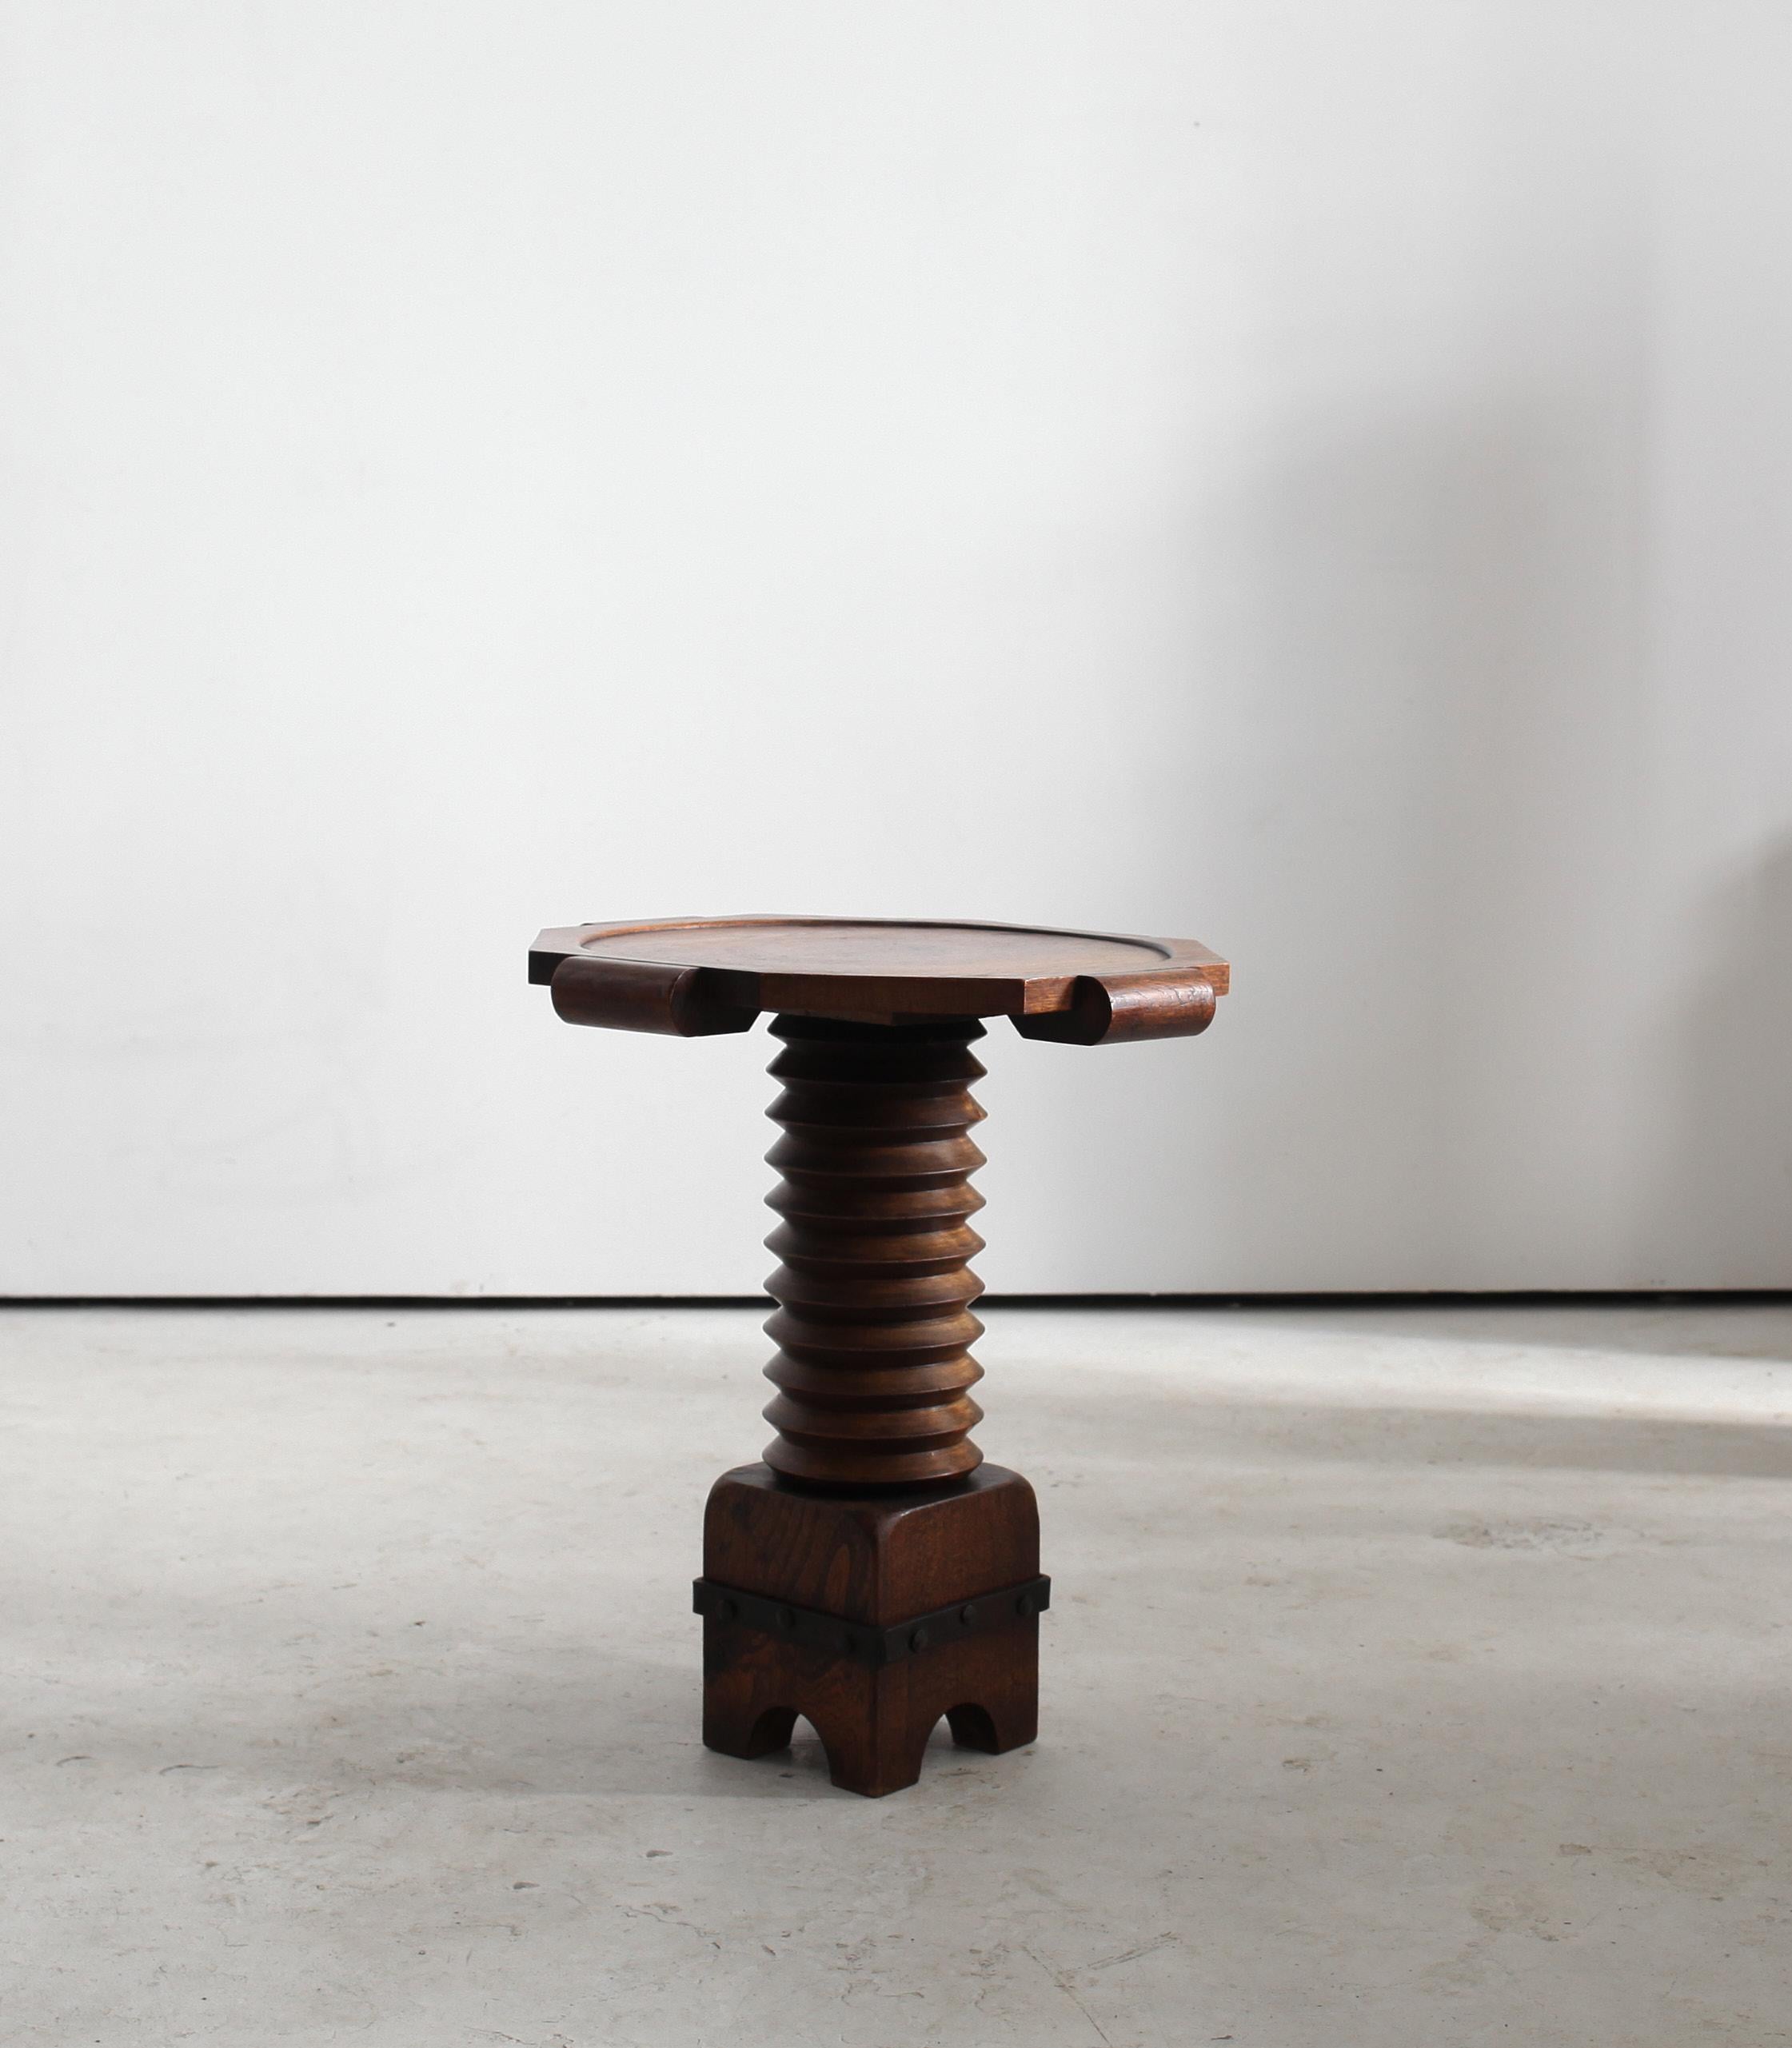 A C.1940s turned oak & walnut side table by French designer Charles Dudouyt

Unusual rare model.